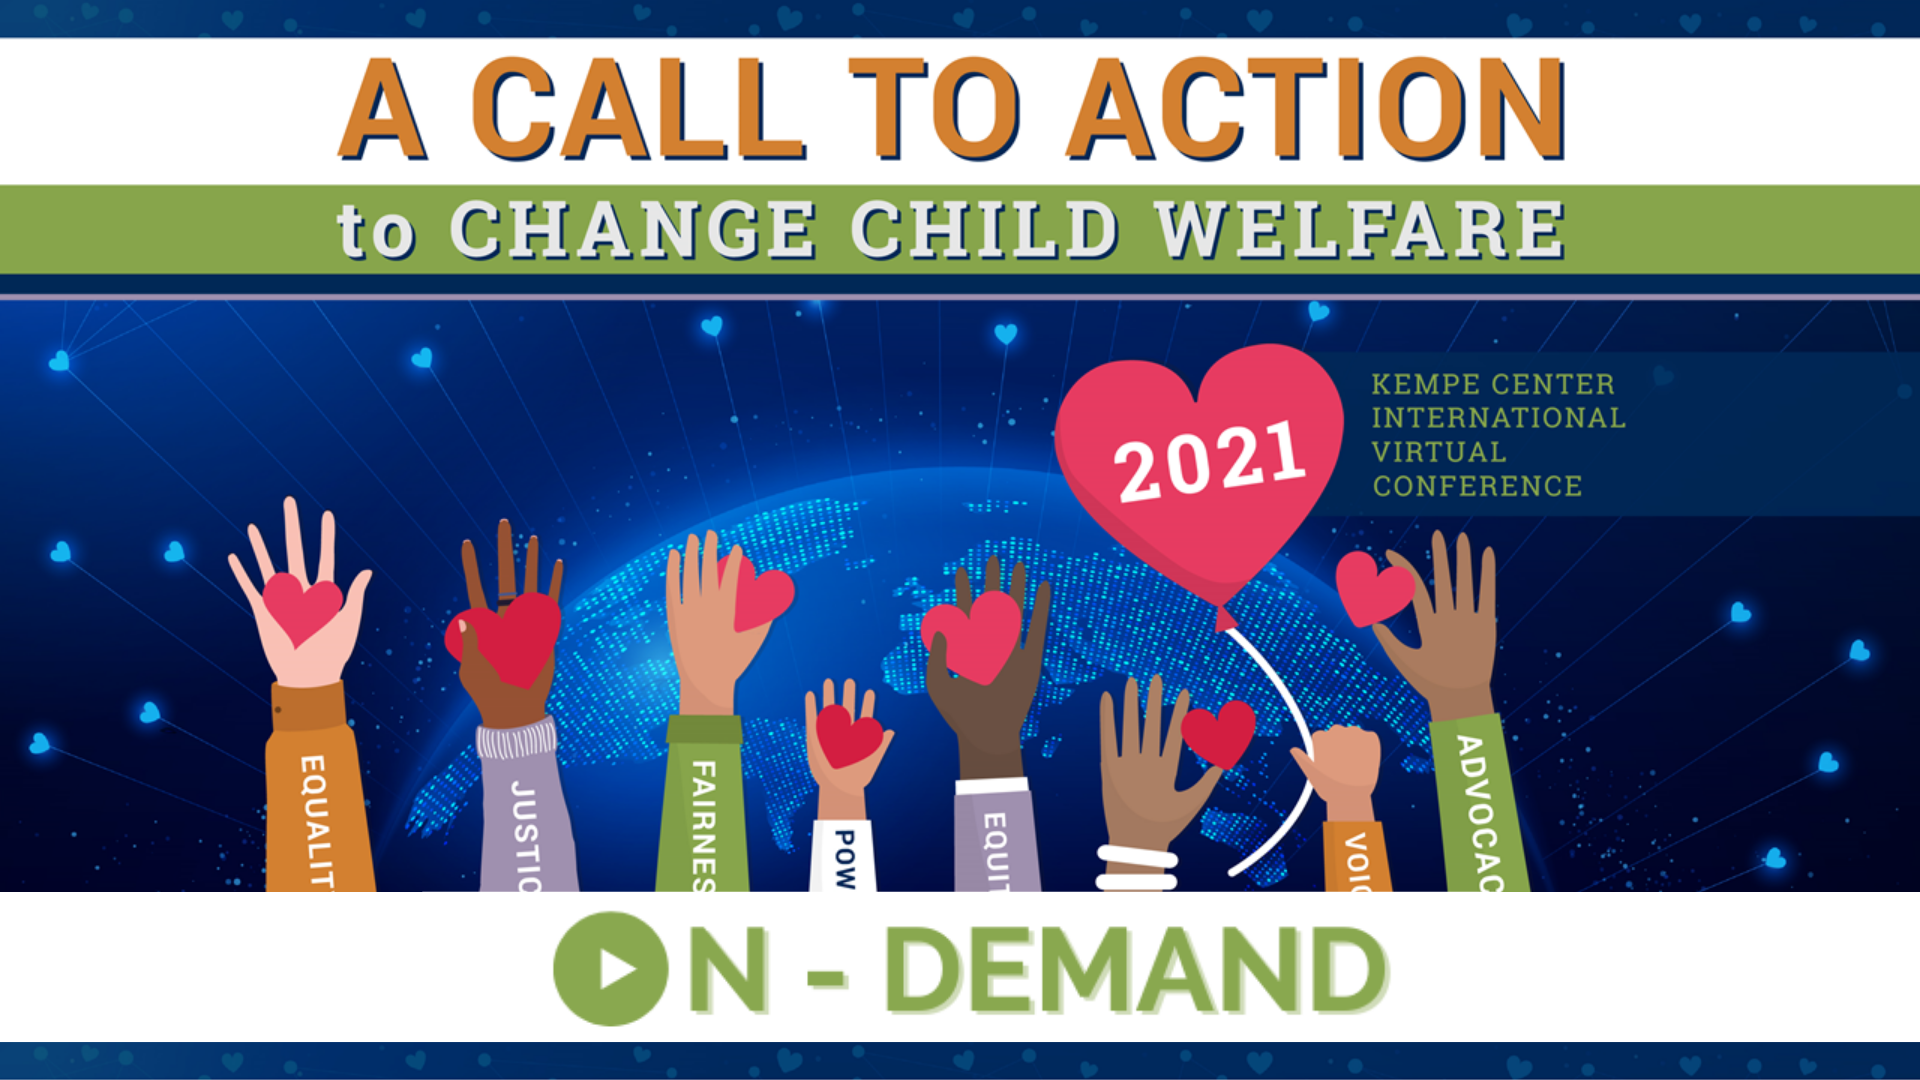 Save the Date for the 2021 A Call to Action Conference! October 4 - 7, 2021